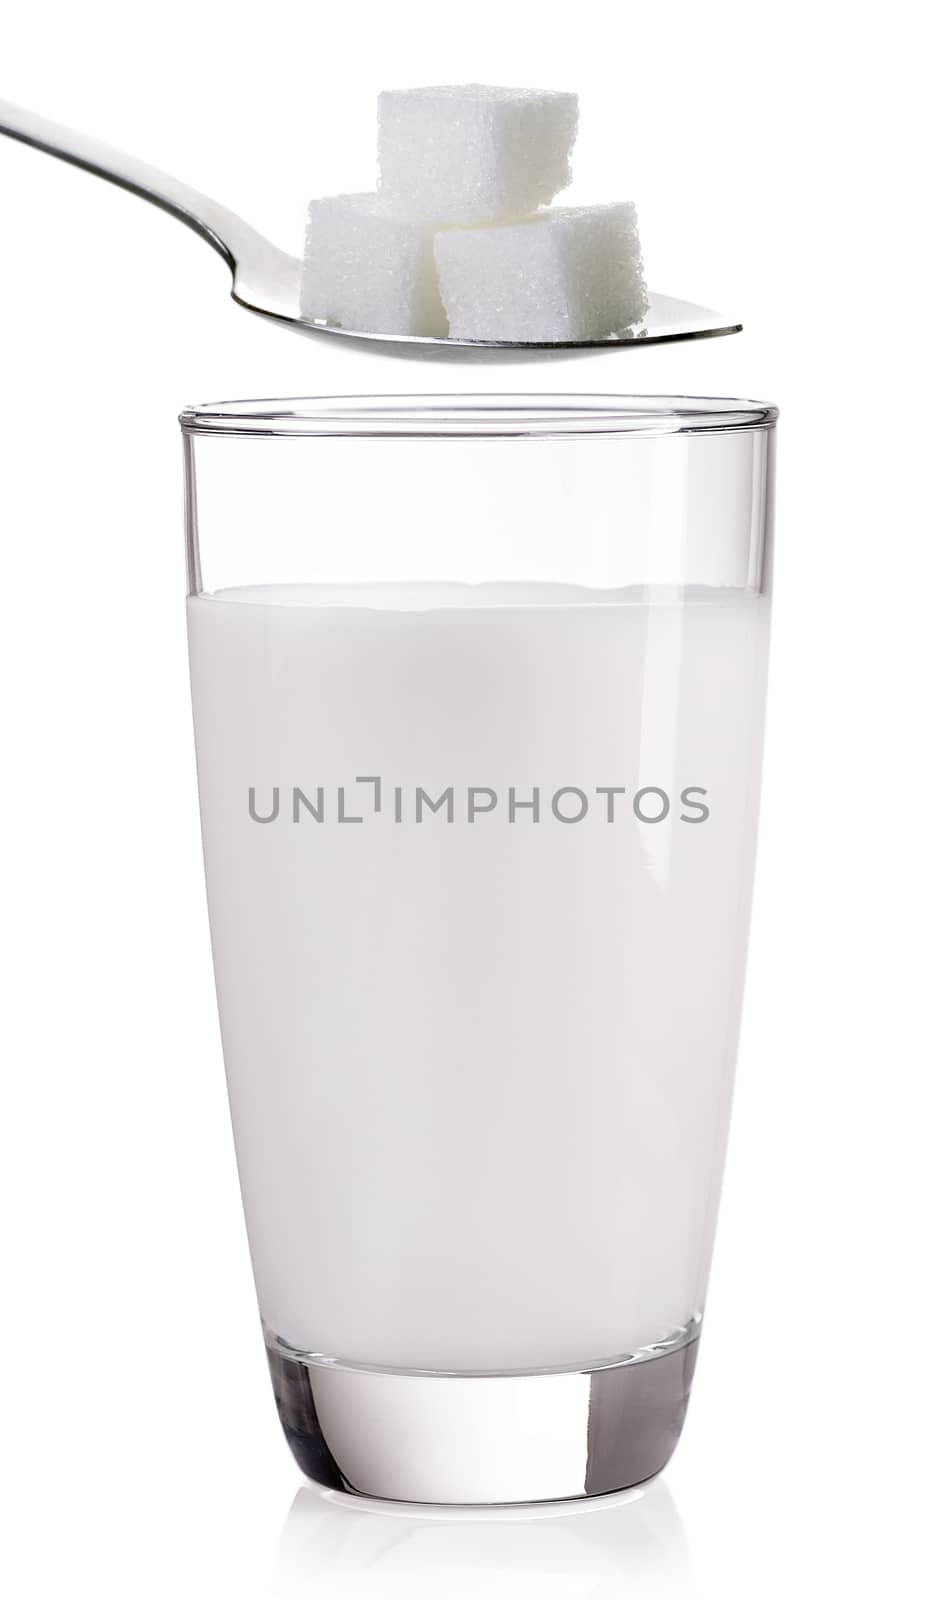 glass of milk  with sugar on a white background